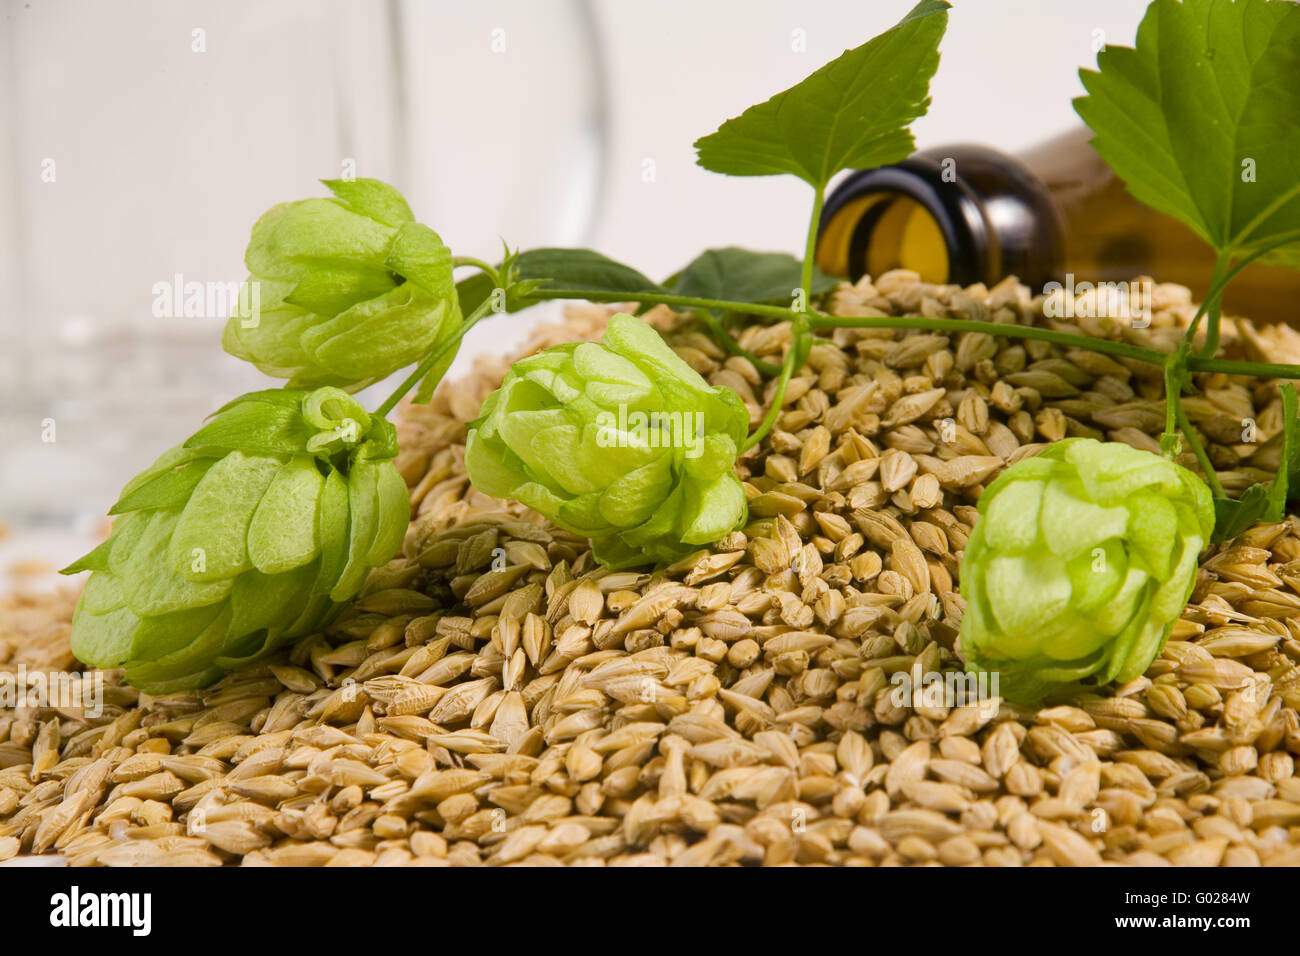 ingredients for brewing beer Stock Photo